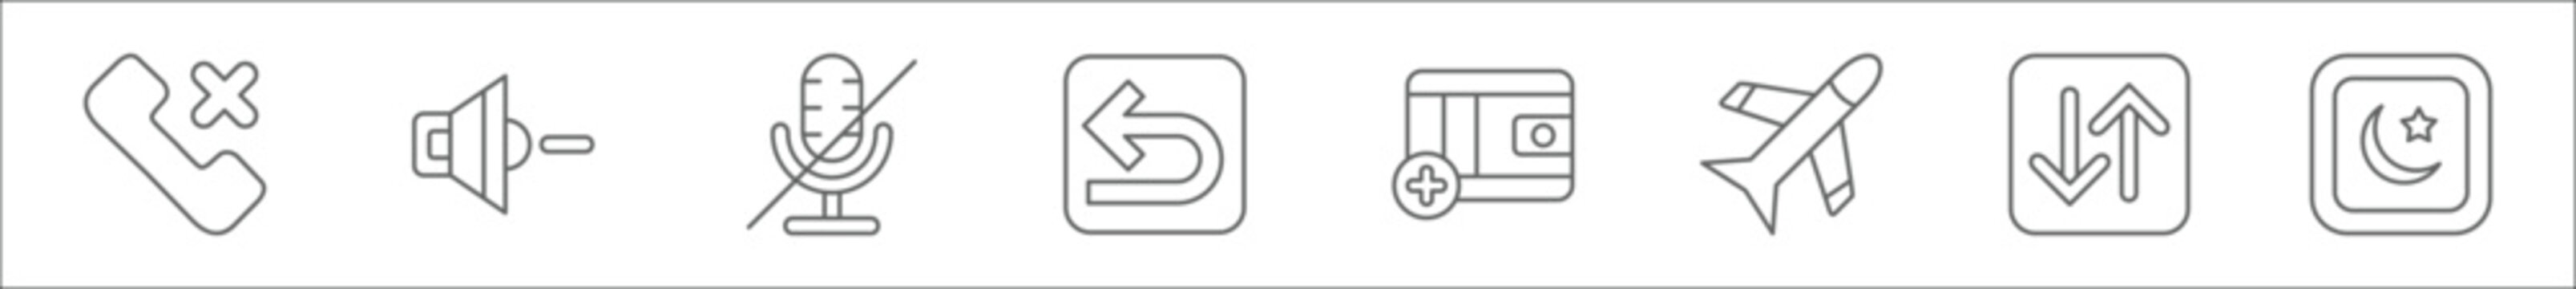 outline set of basic ui line icons. linear vector icons such as no call, volume down, sound off, return, ewallet, flight, transfer, night mode